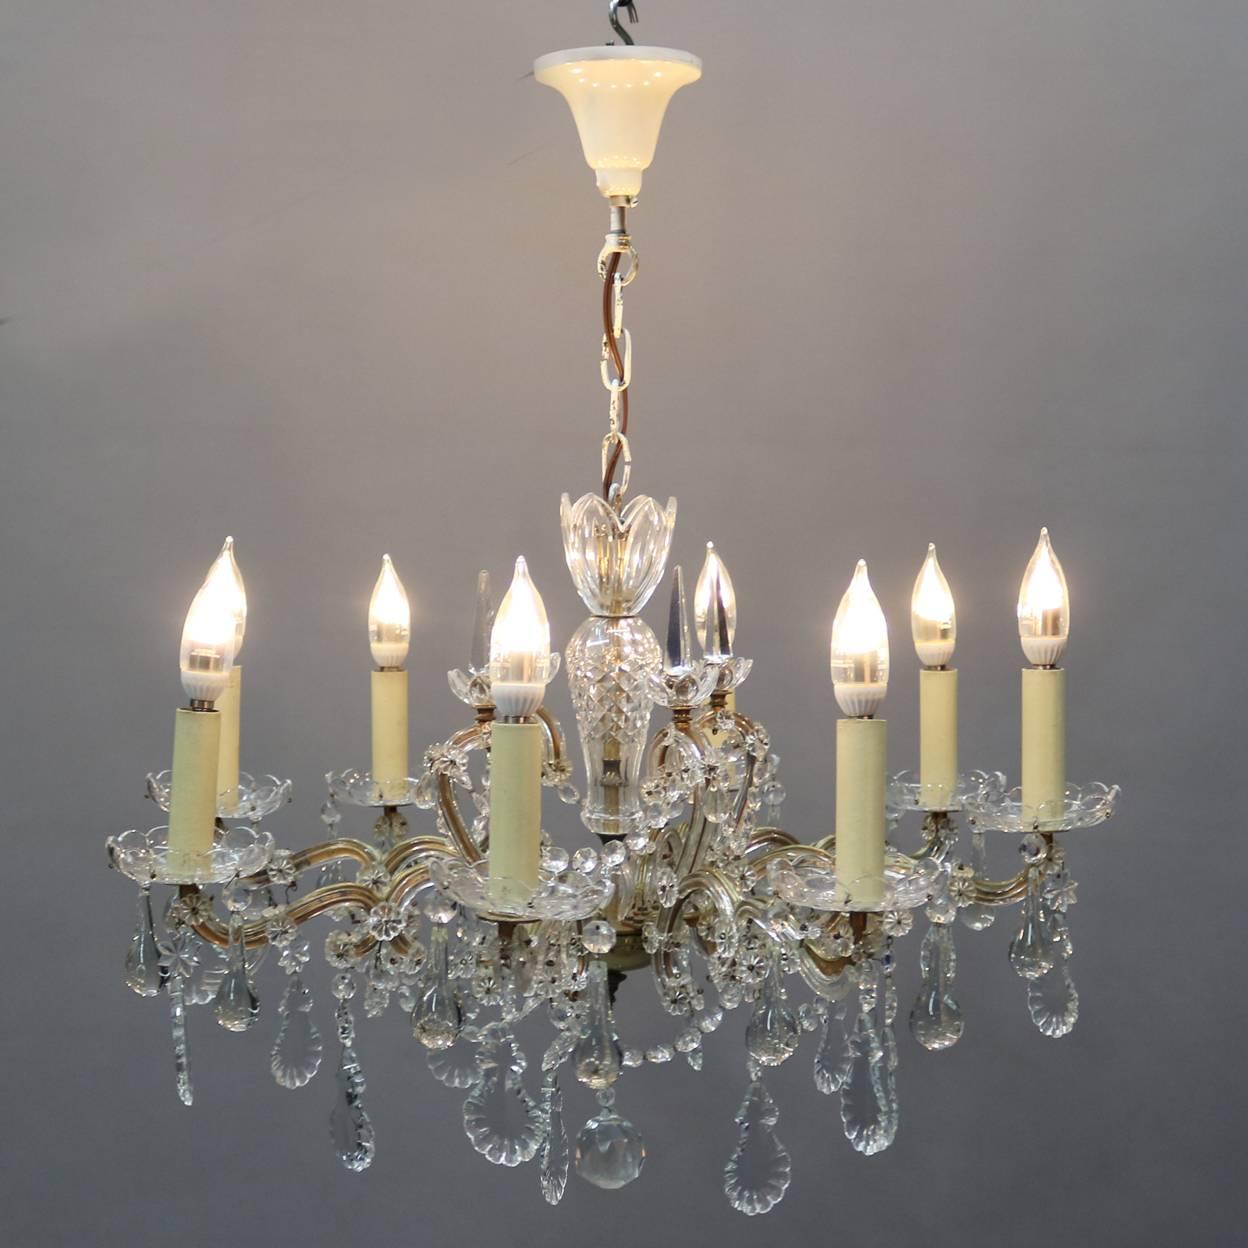 Continental French chandelier features bronze frame with cut crystal bodice and eight cut crystal and prism laden scroll arms terminating in candle lights, newly rewired, 20th century

Measures: 29